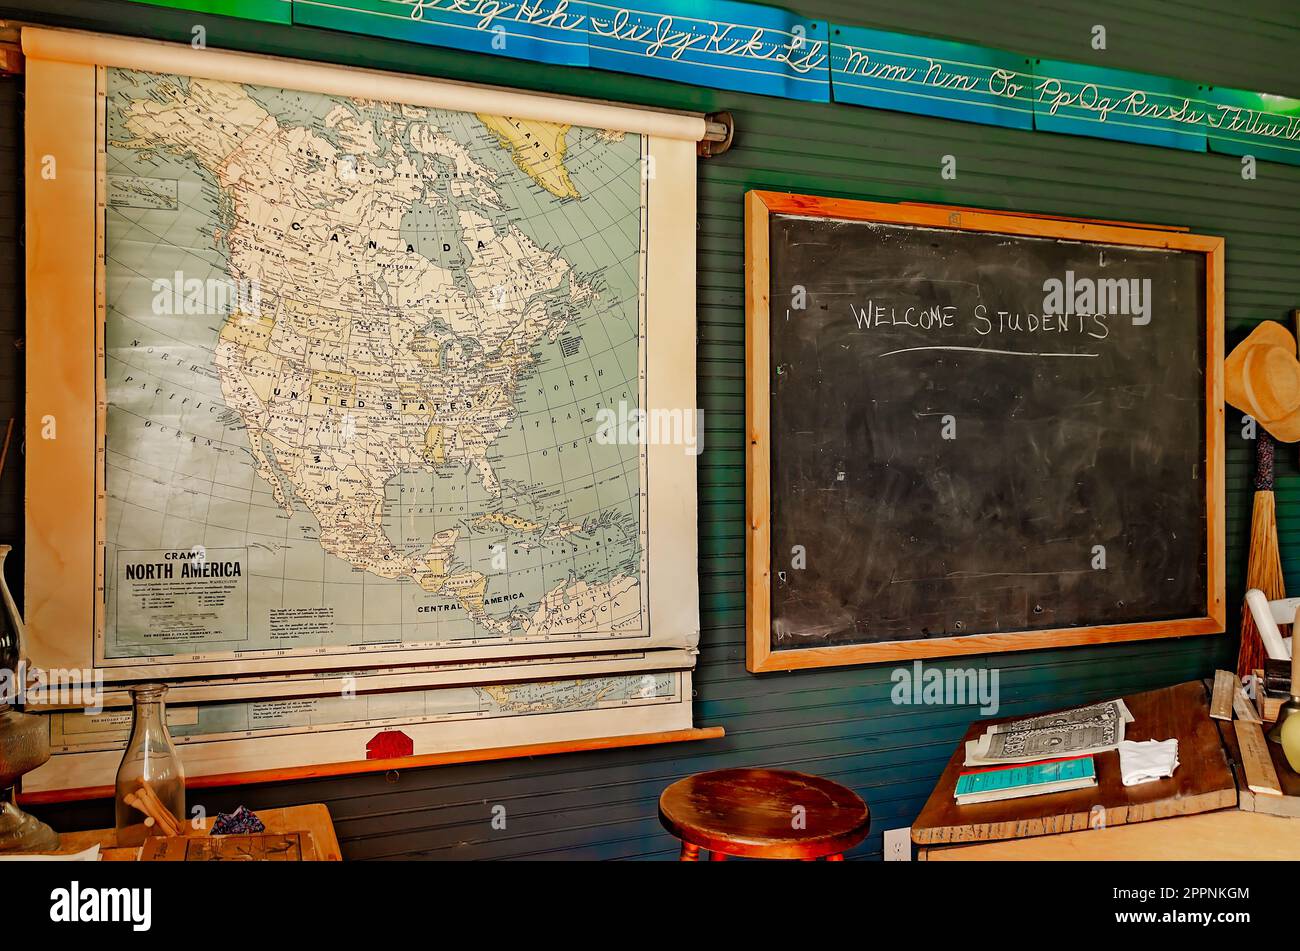 A chalkboard welcomes students to the Little Red Schoolhouse in Baldwin County Bicentennial Park in Stockton, Alabama. Stock Photo